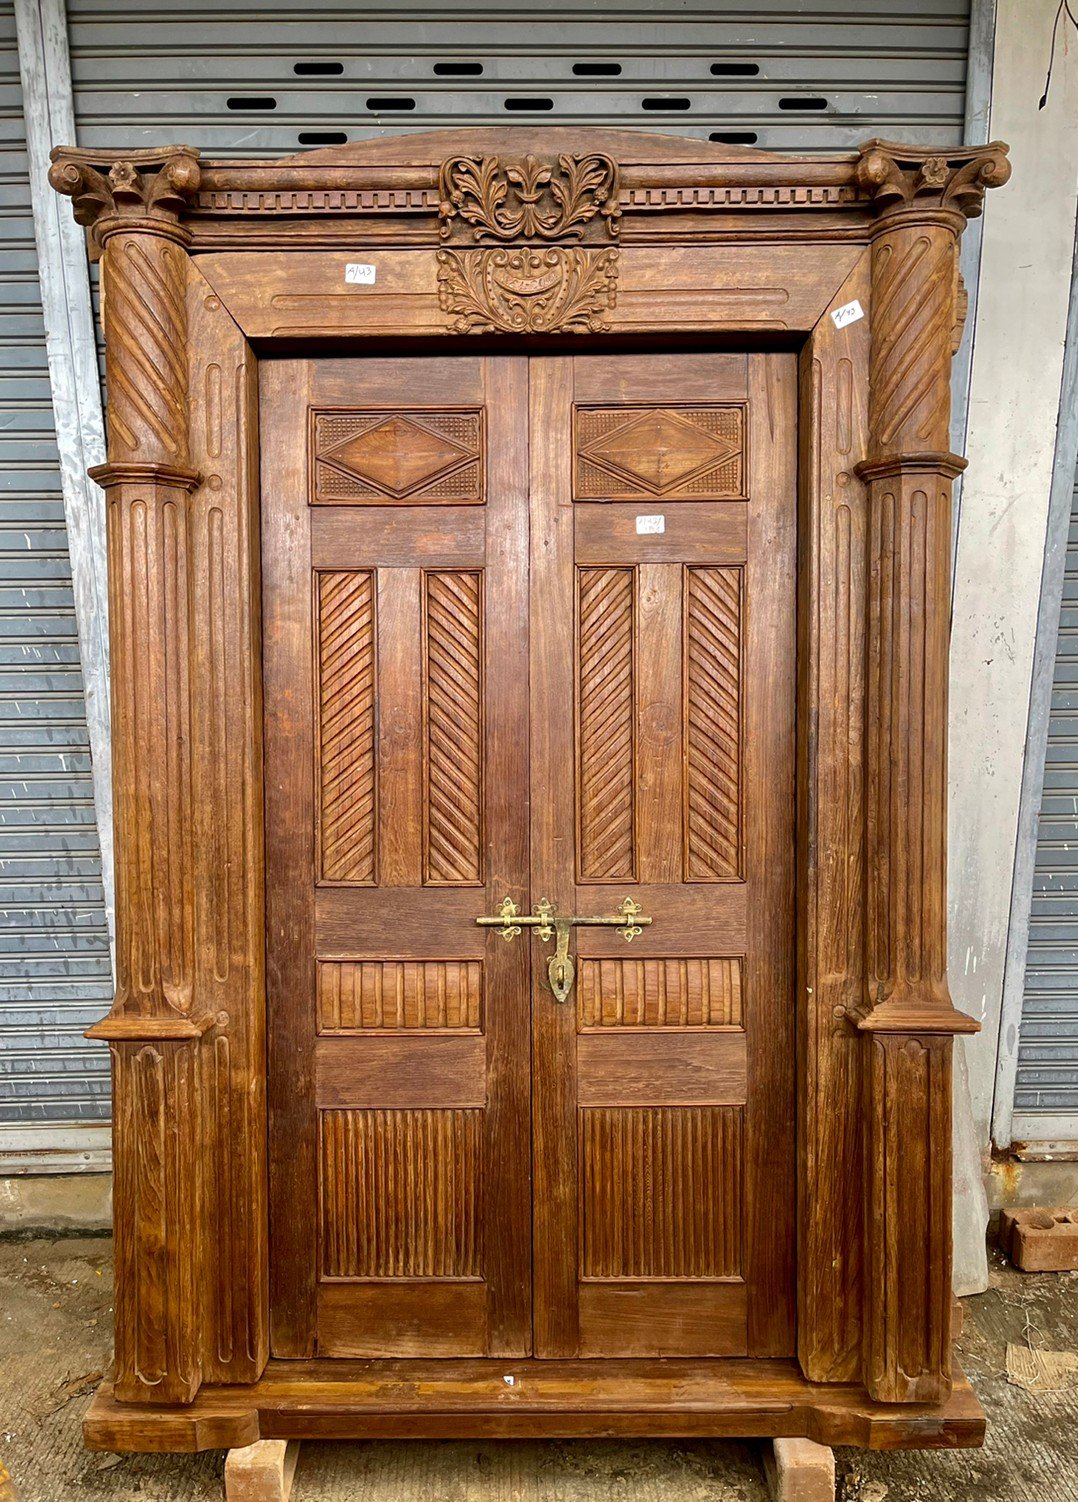 L121 European Colonial Door with Carving